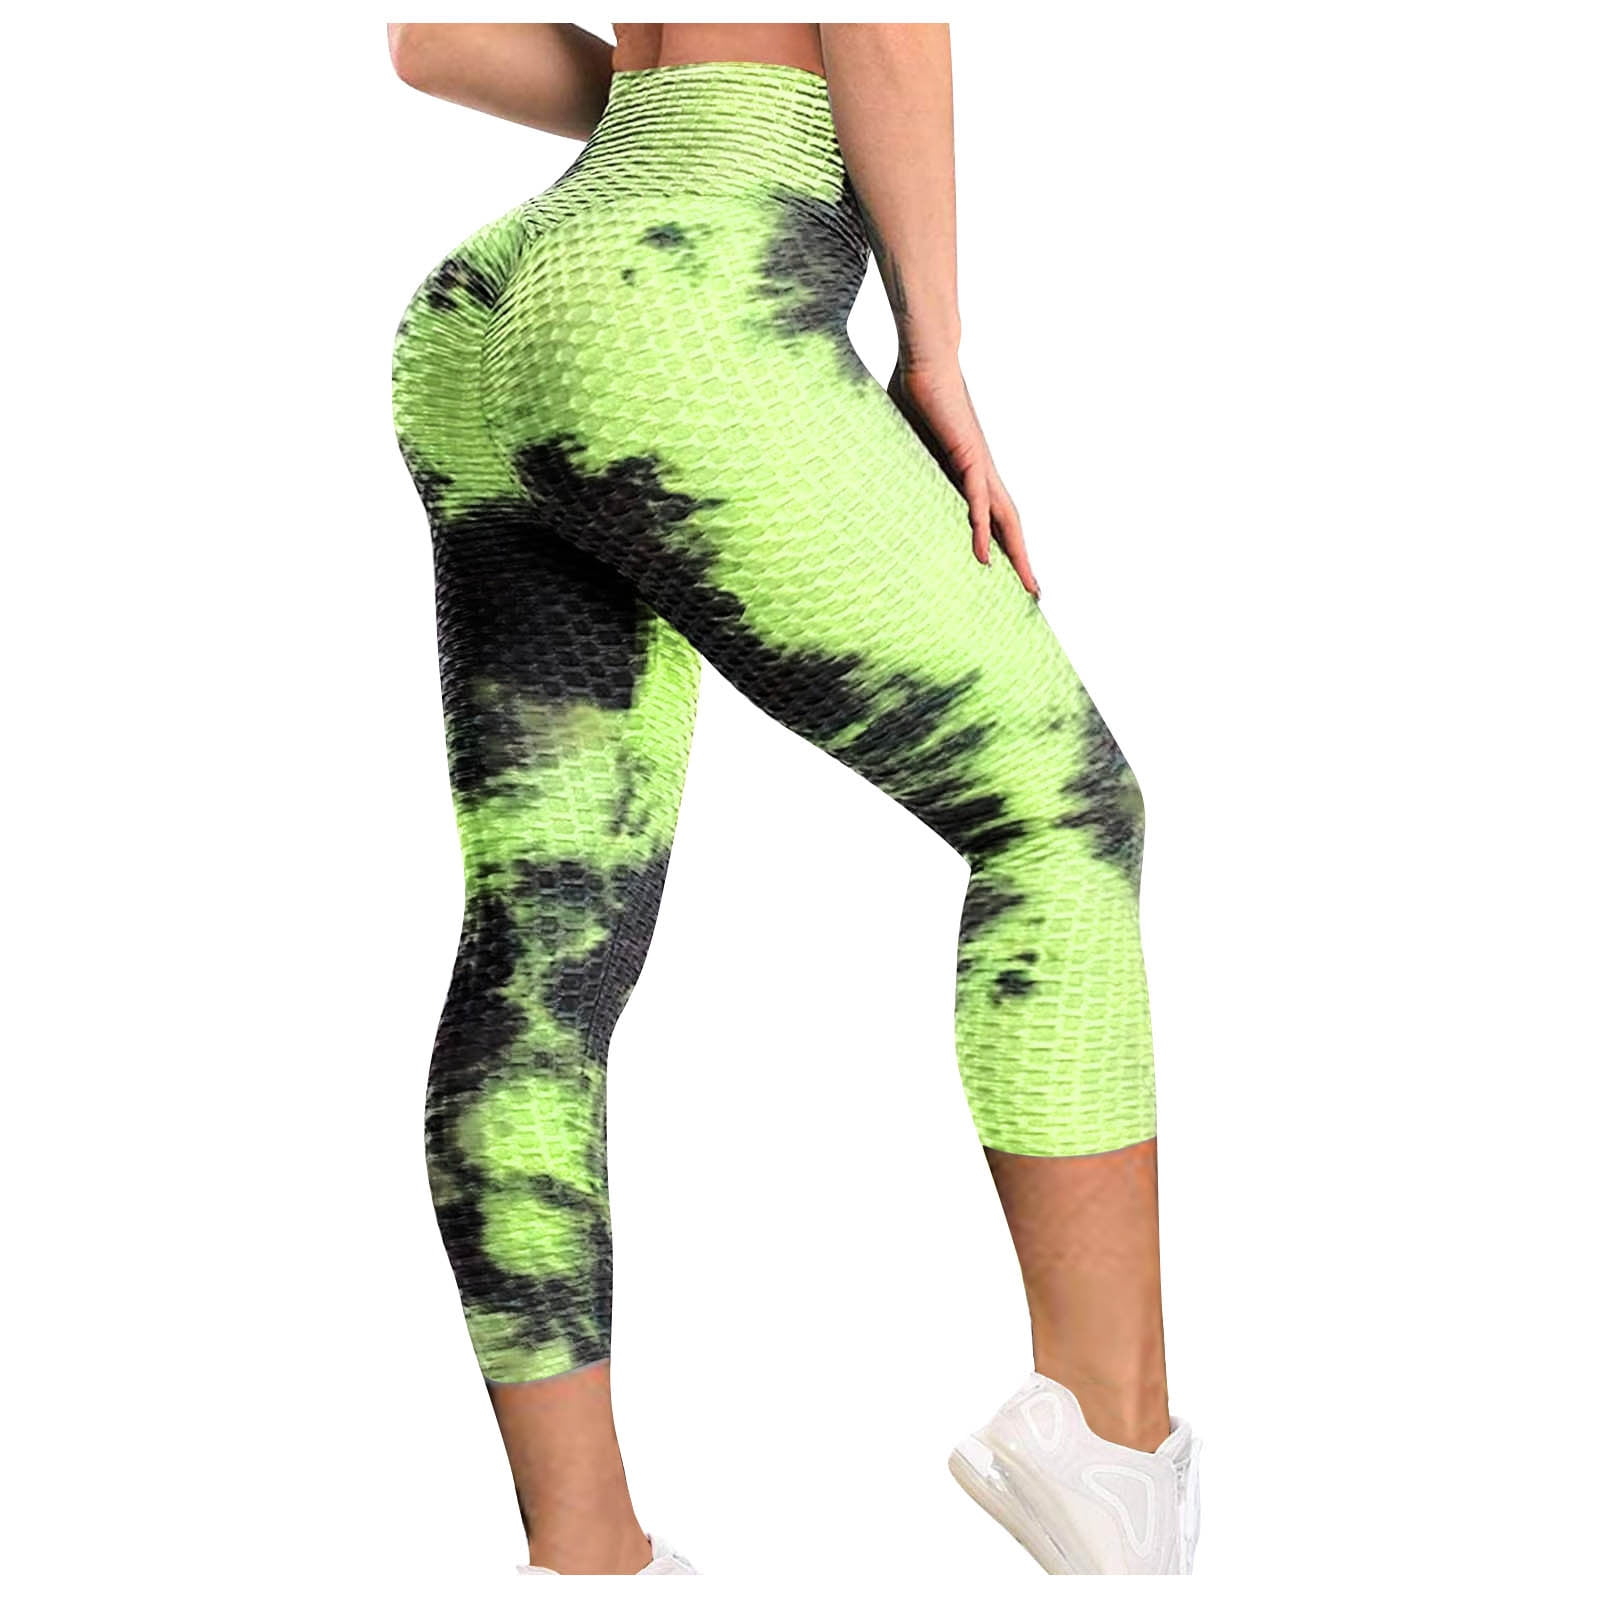 Ayolanni Leather Leggings for Women Women's Tie-Dye Breathable Hip